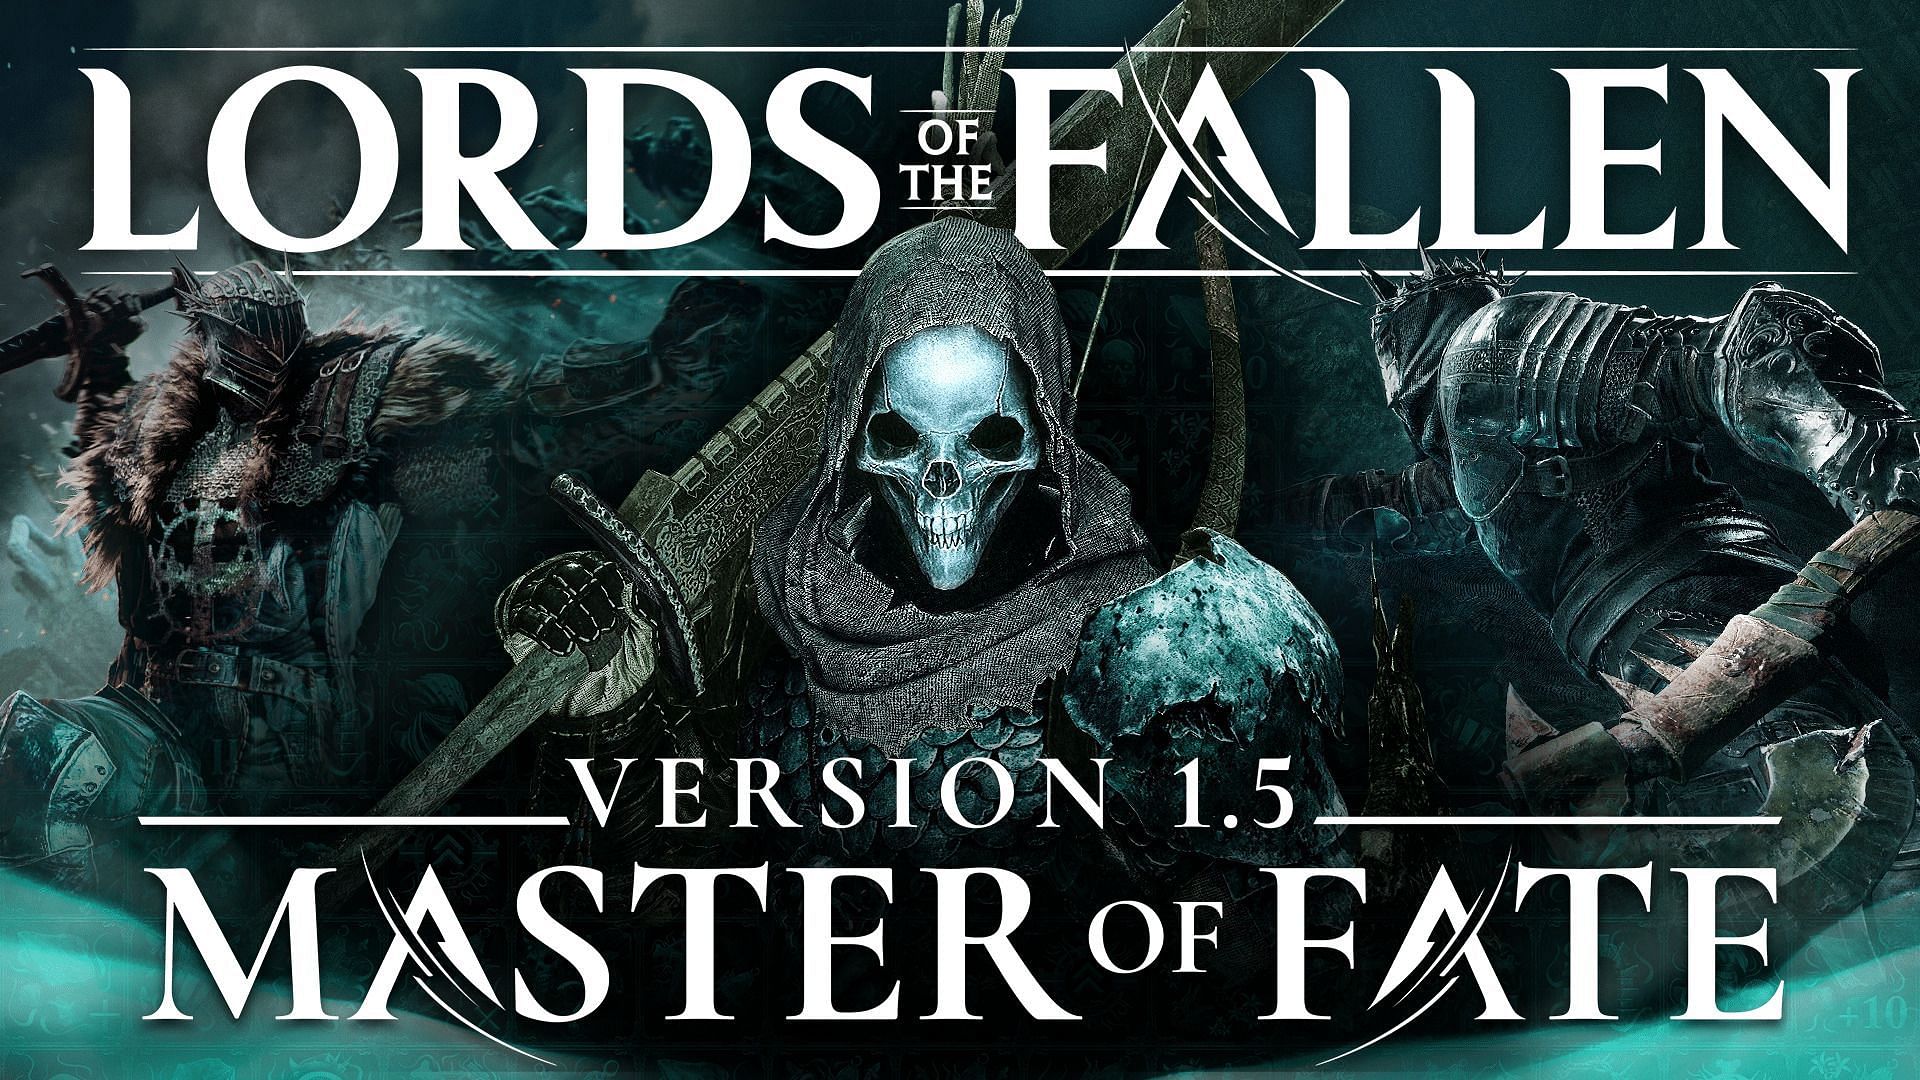 The Master of Fate update for Lords of the Fallen is live (image via CI Games)